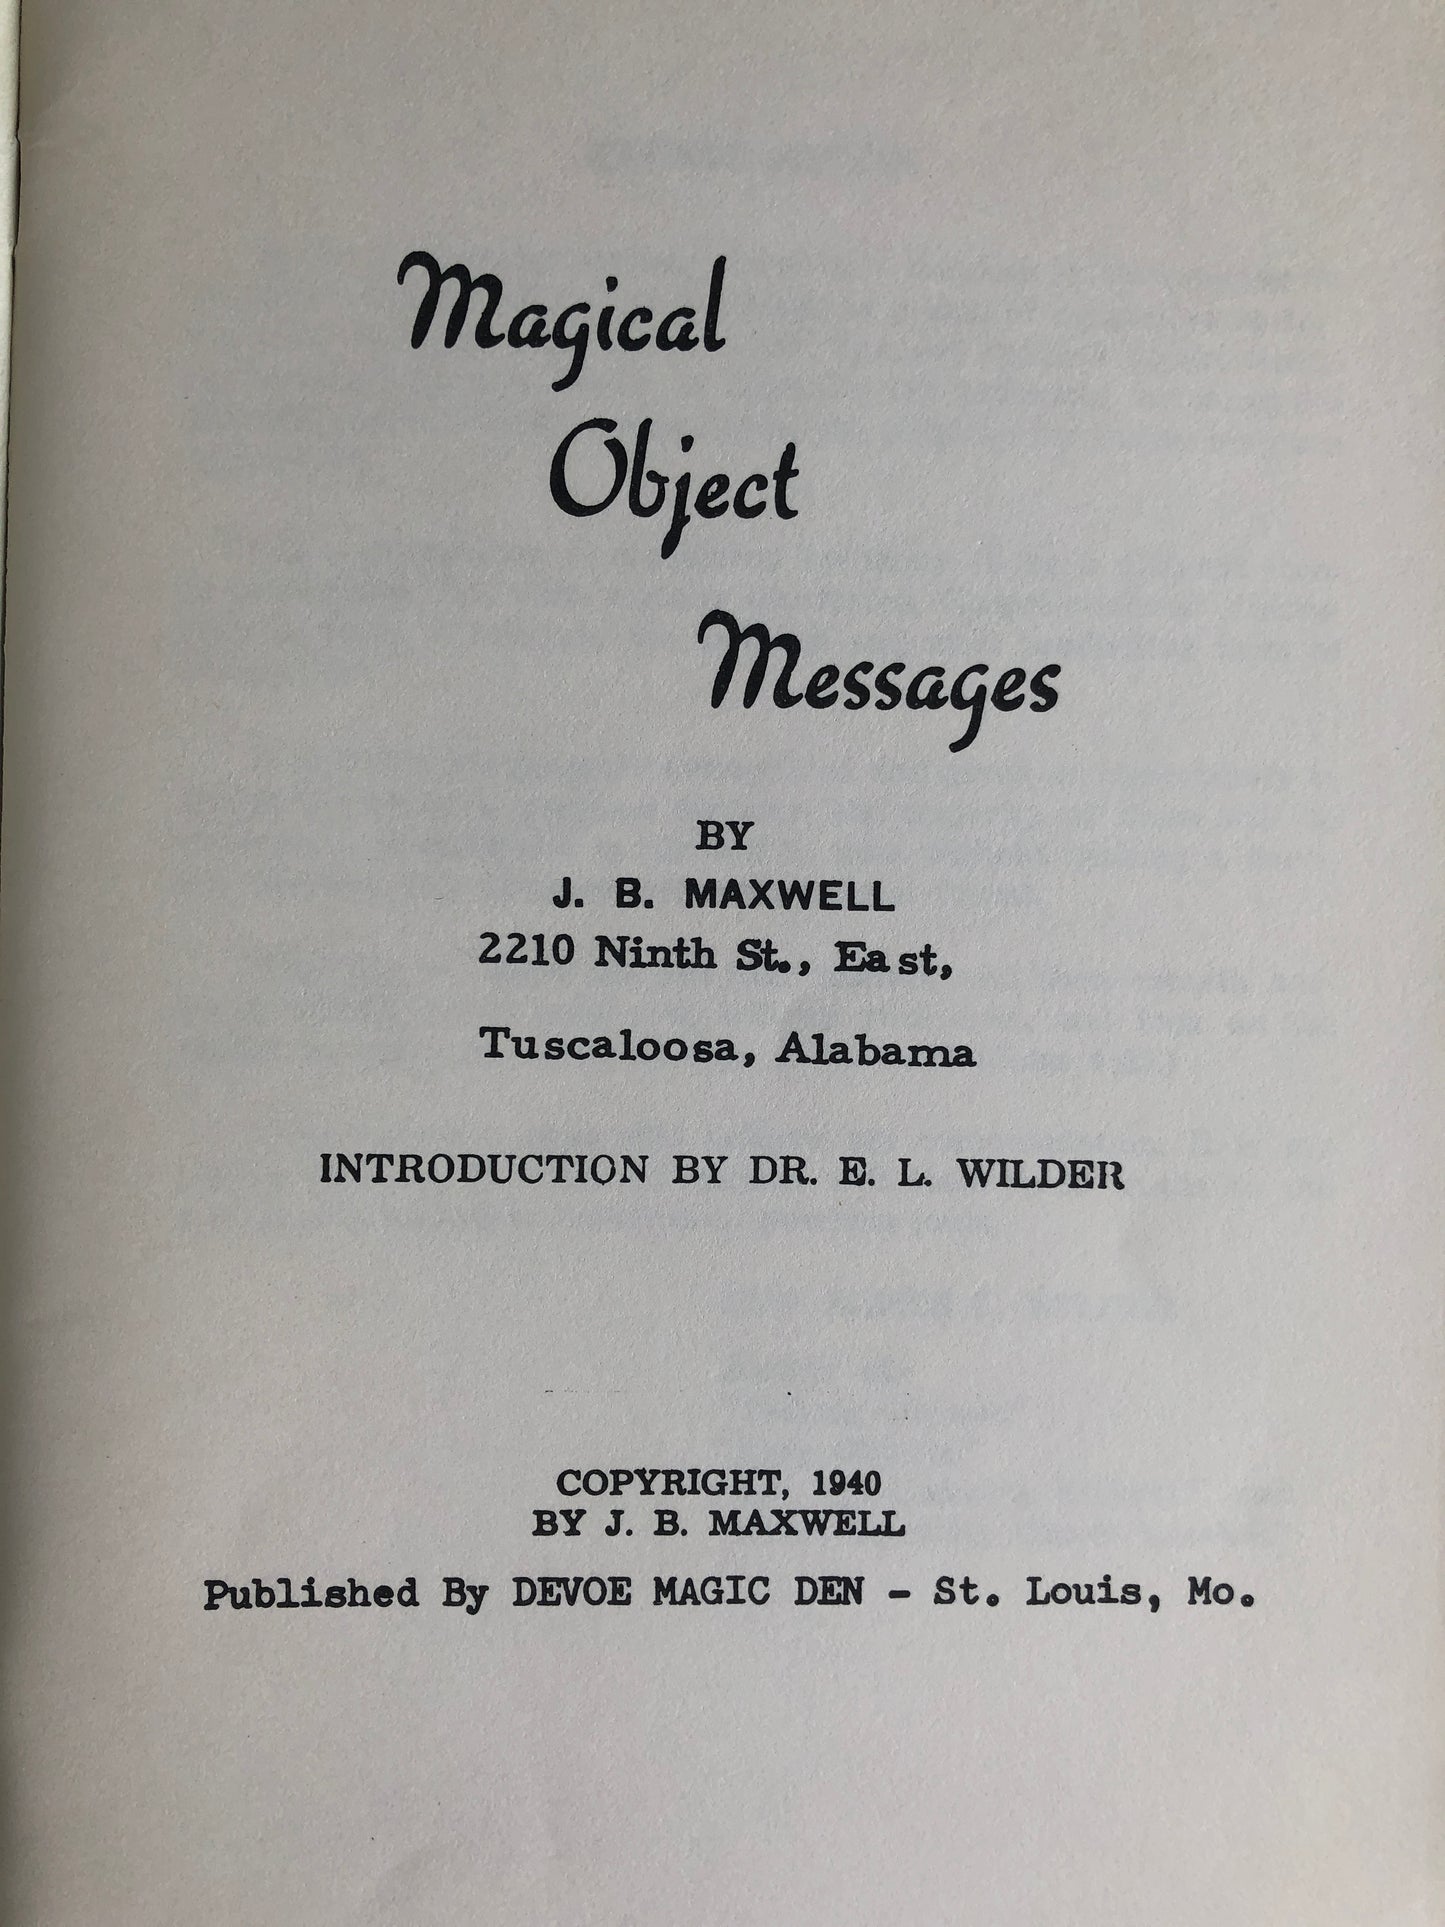 Magical Object Messages - Rev. J. B. Maxwell